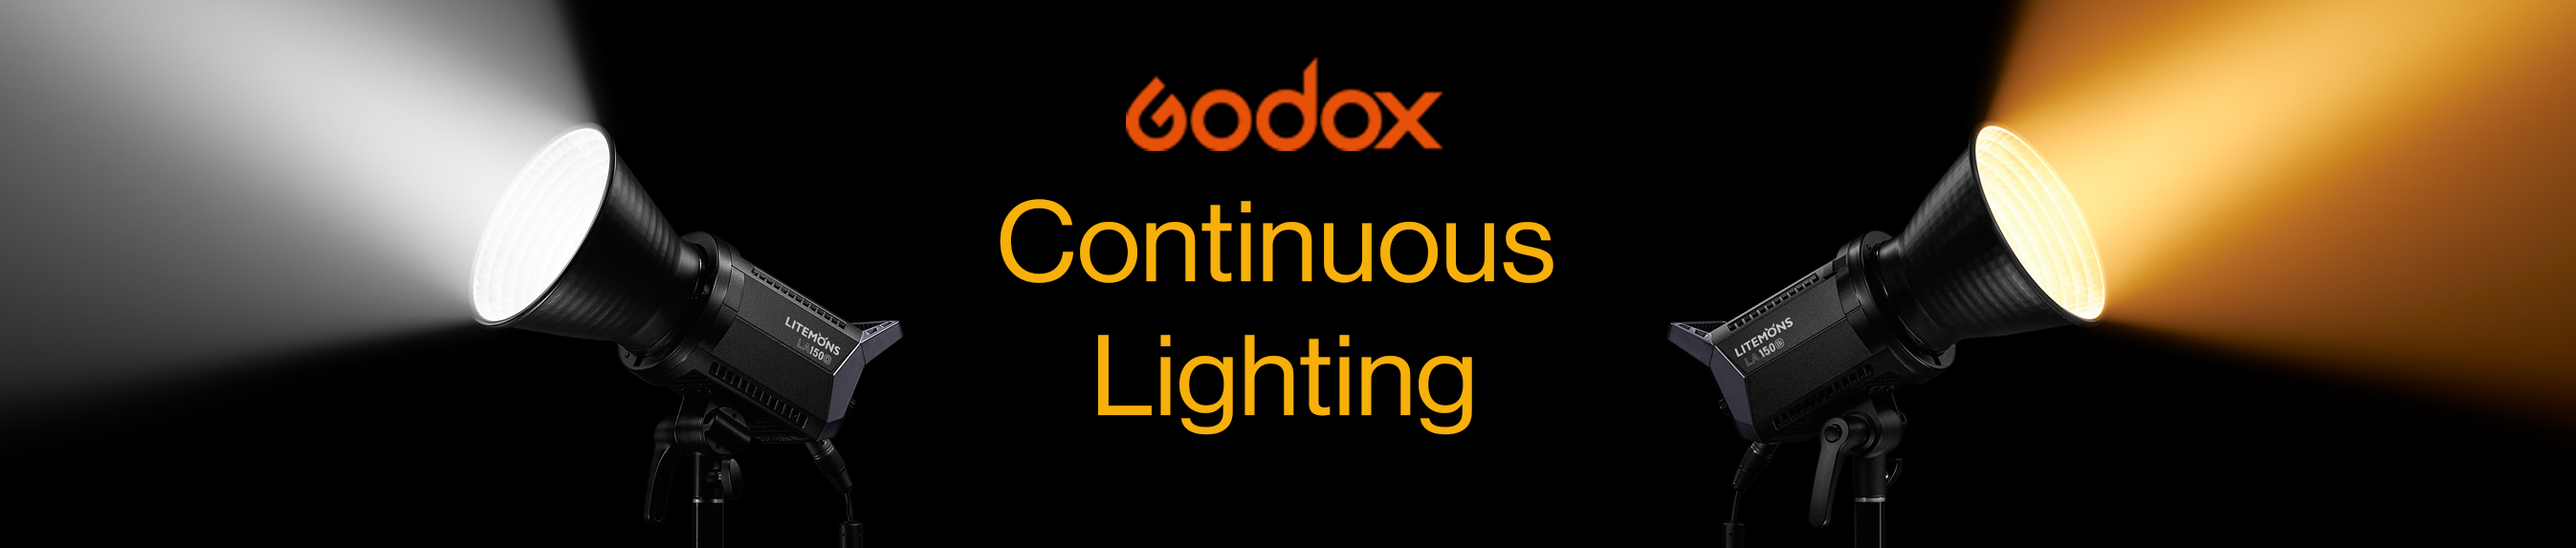 Godox Continuous Lighting Banner